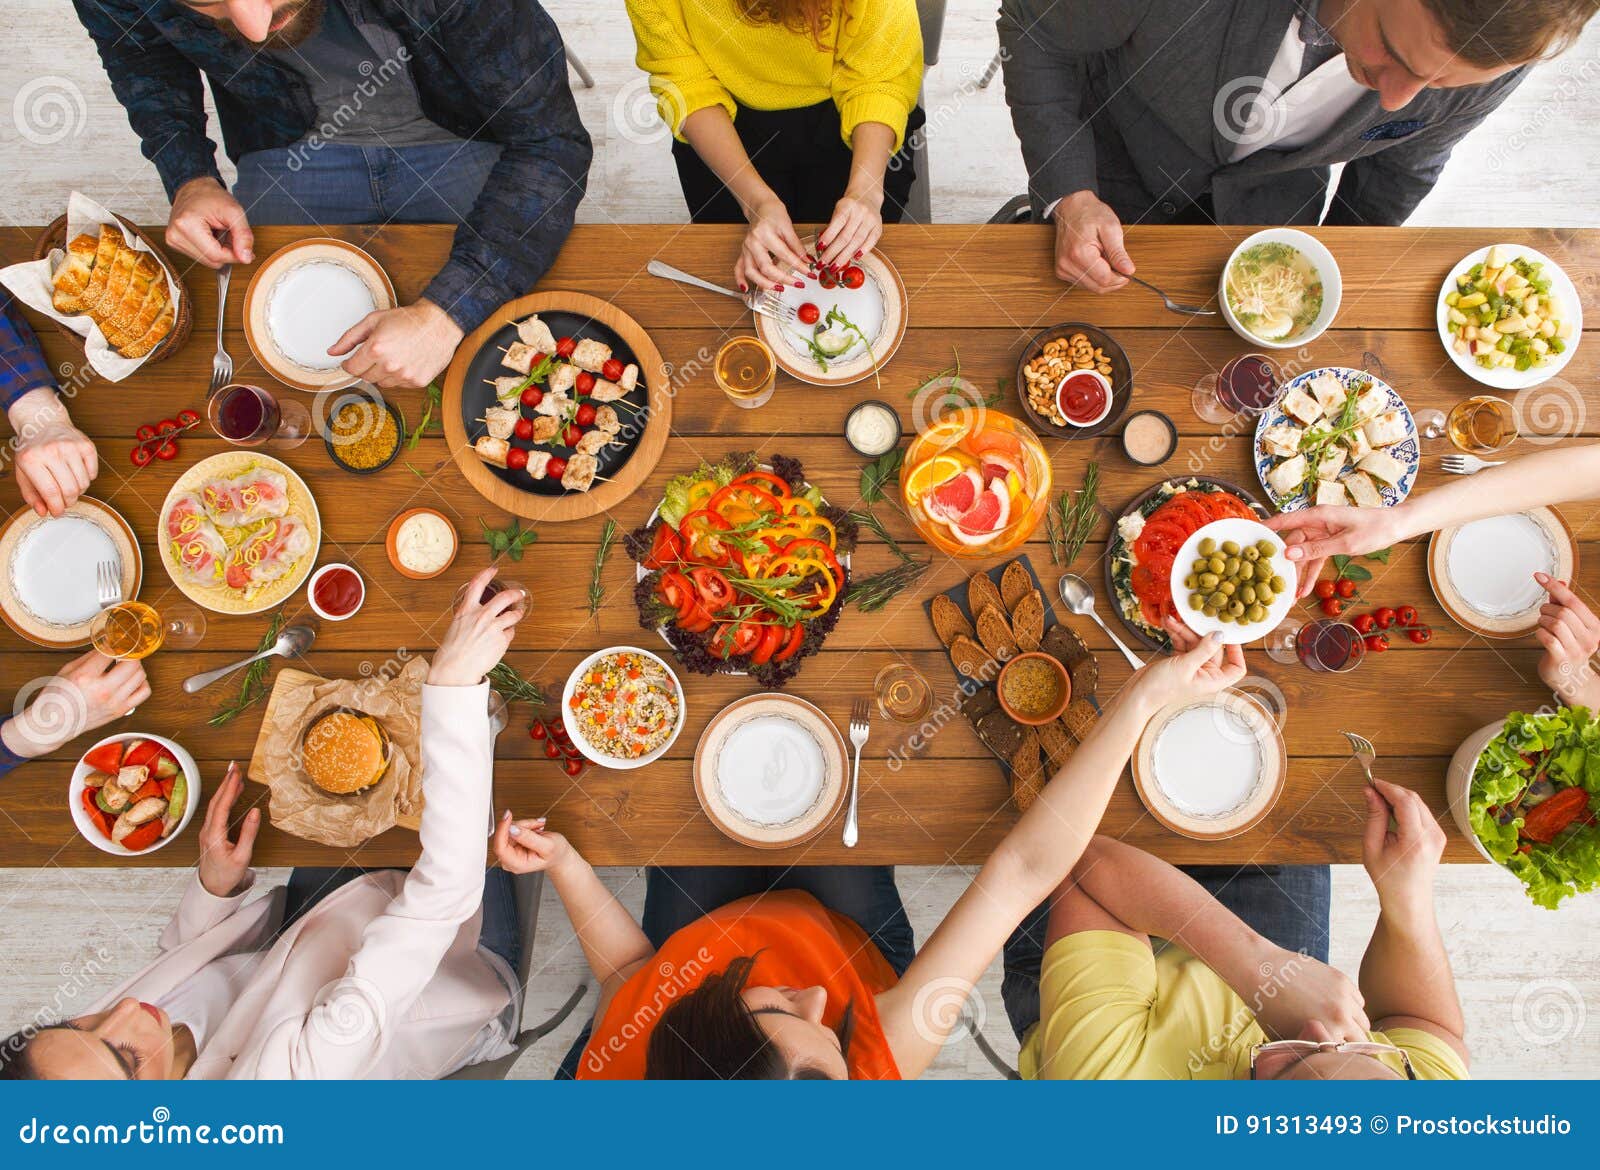 People Eat Healthy Meals At Served Table Dinner Party Stock Image Image Of Corn Hands 91313493